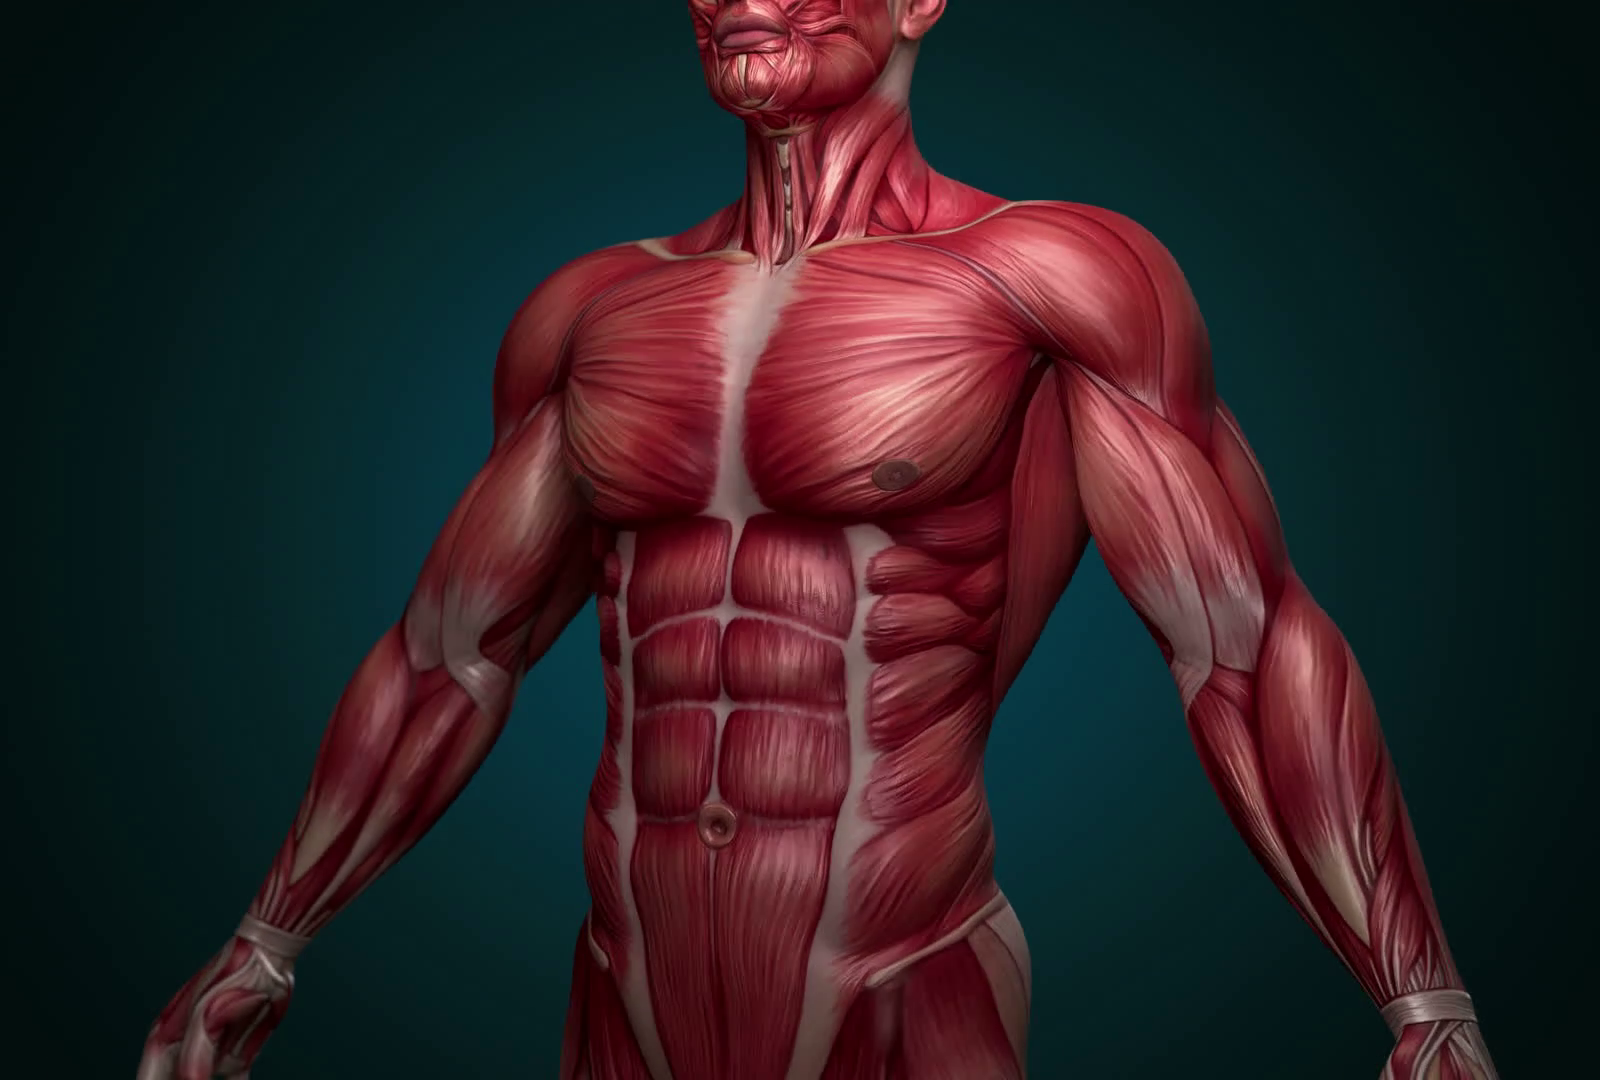 Only Super Smart Will Score Better Than 12 on This General Knowledge Quiz Muscular system